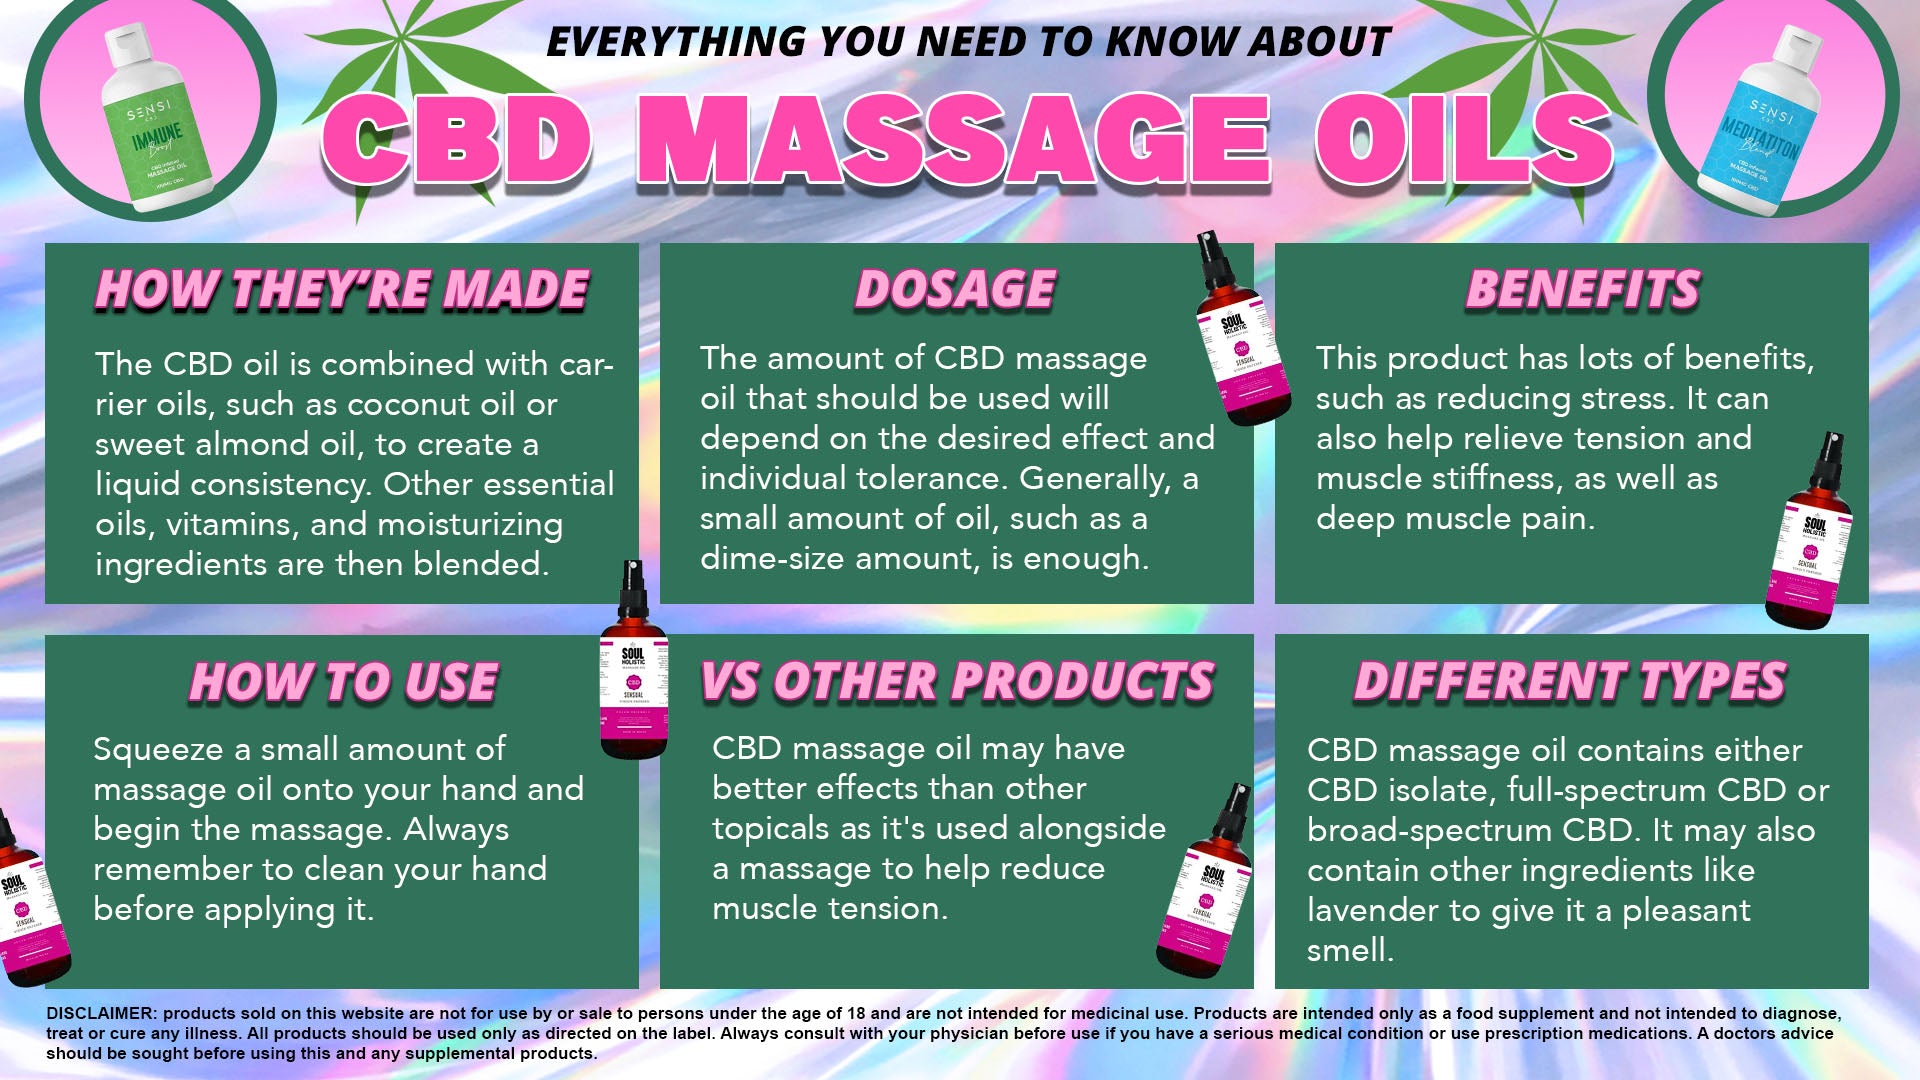 What Can I Use CBD Massage Oils for?